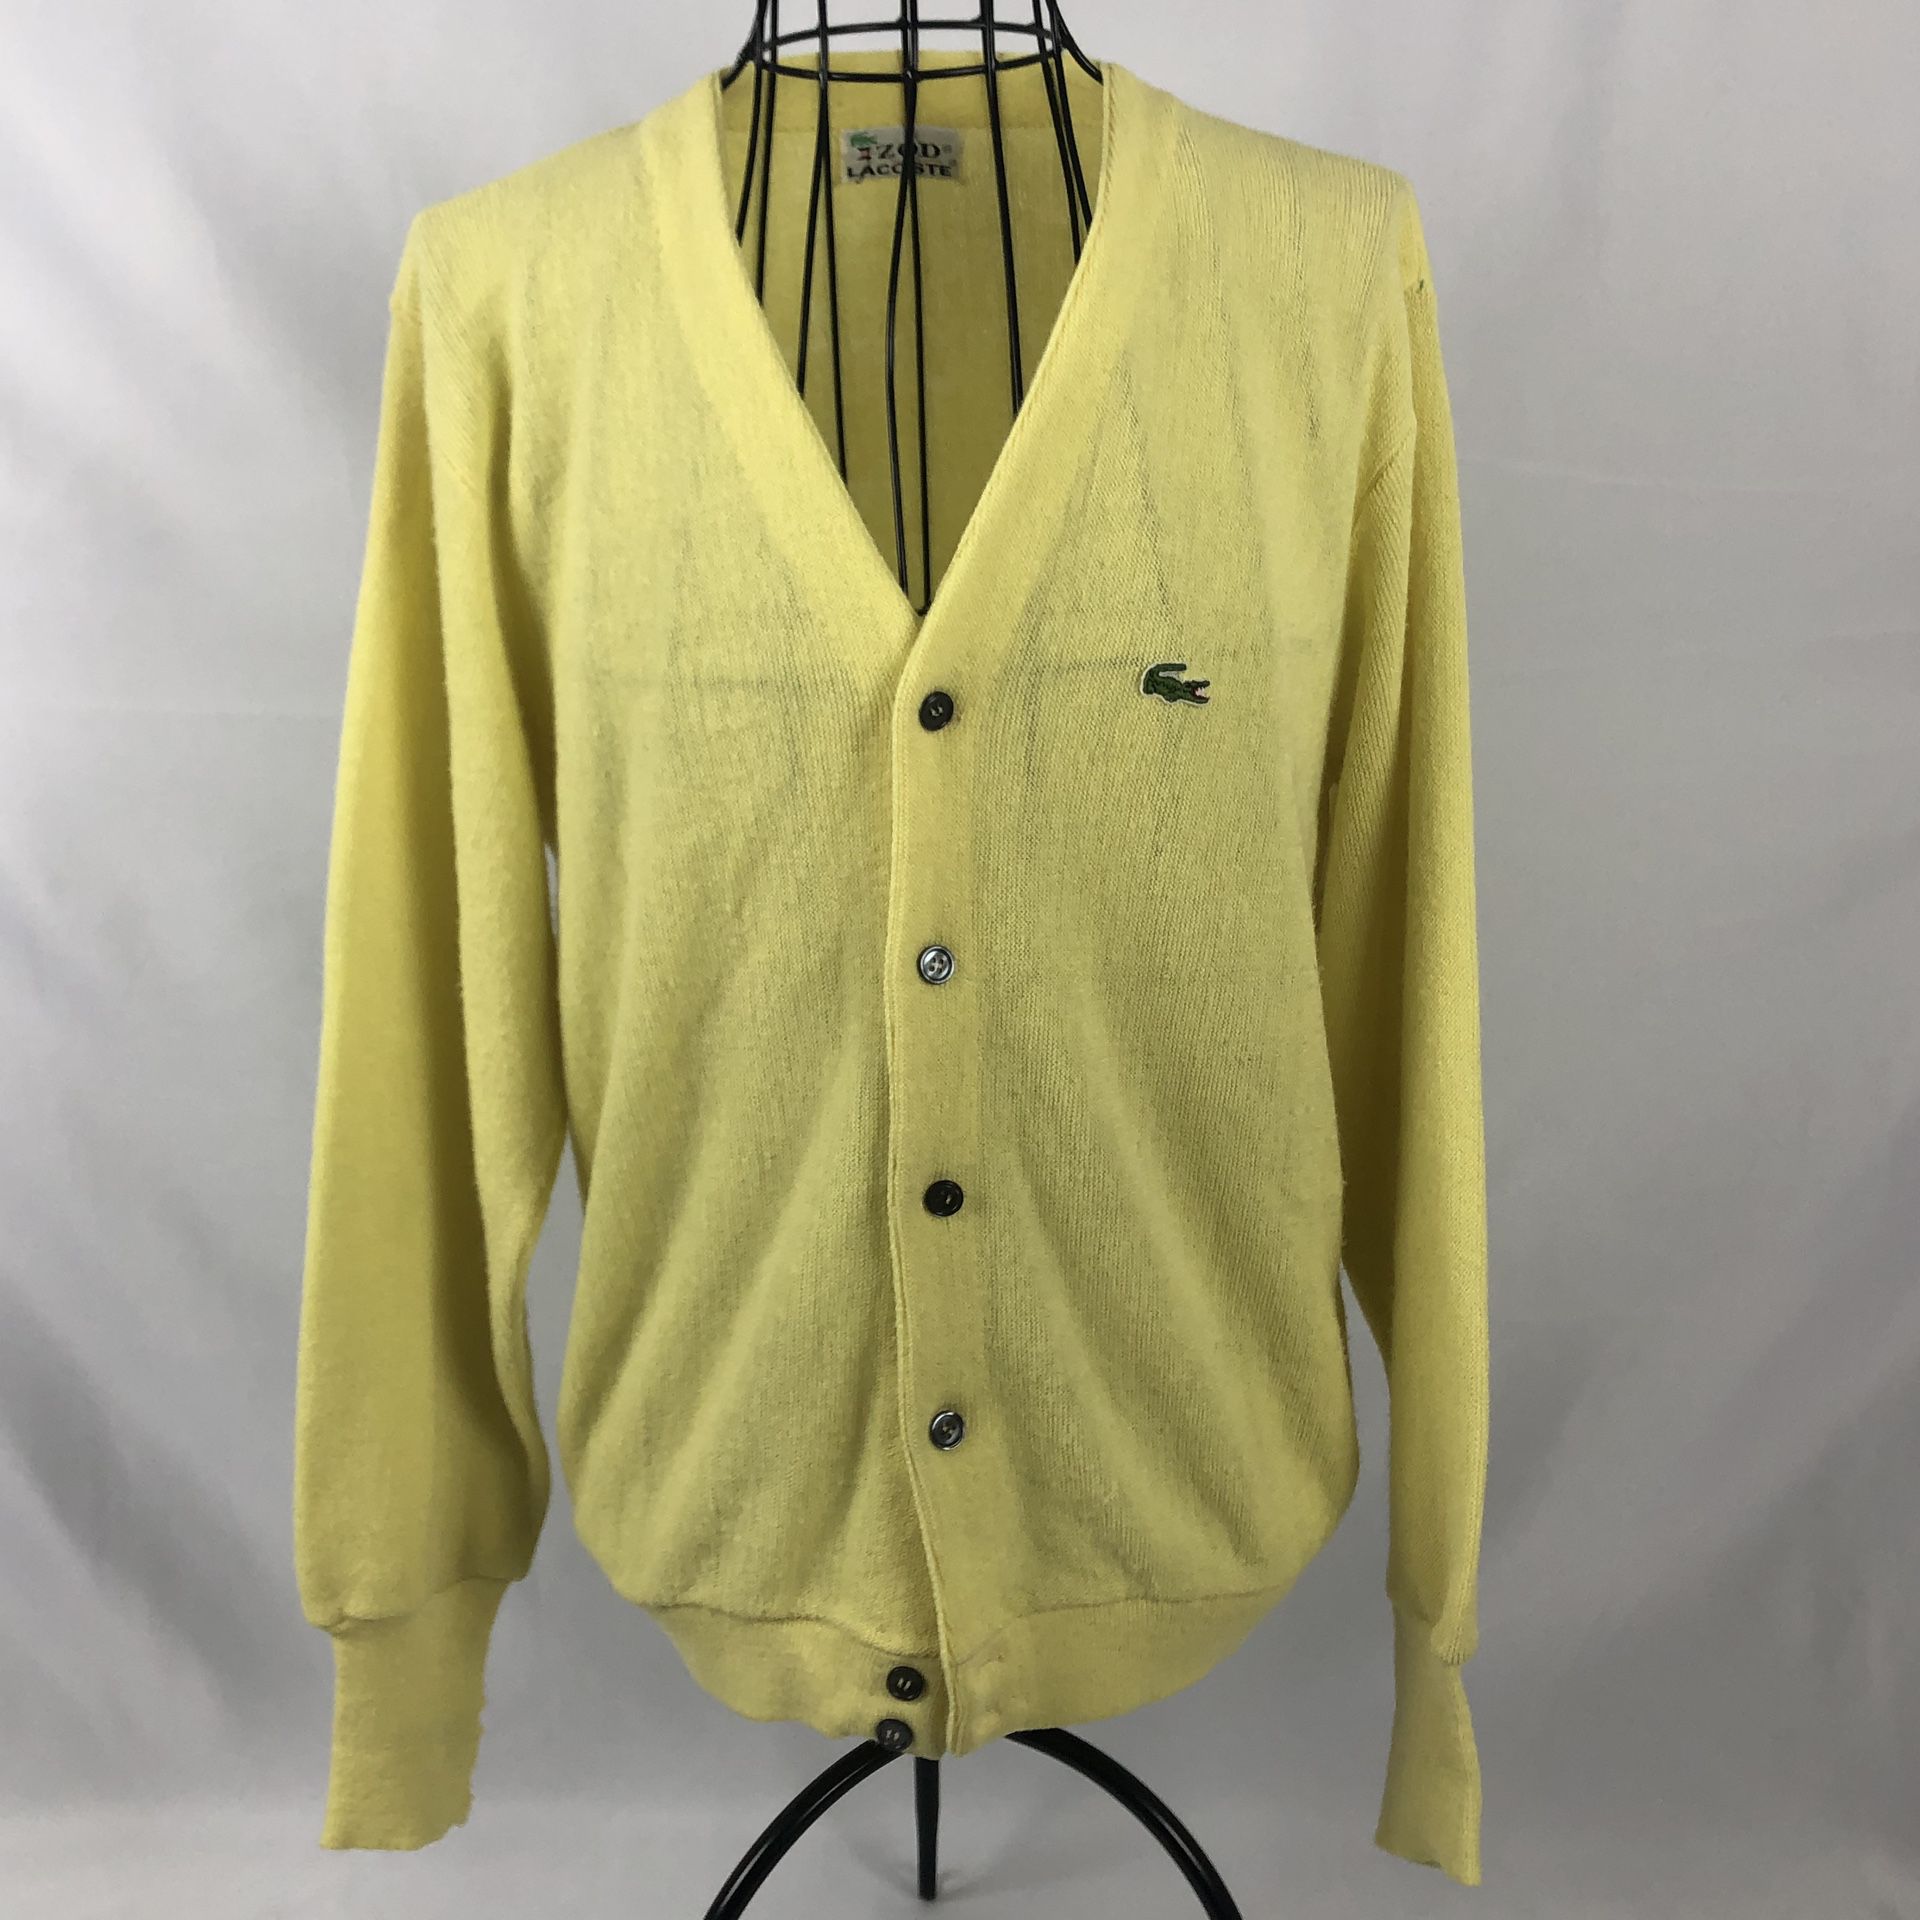 VTG Izod Lacoste Sweater Cardigan Womens Large Great Button Up V Neck Yellow